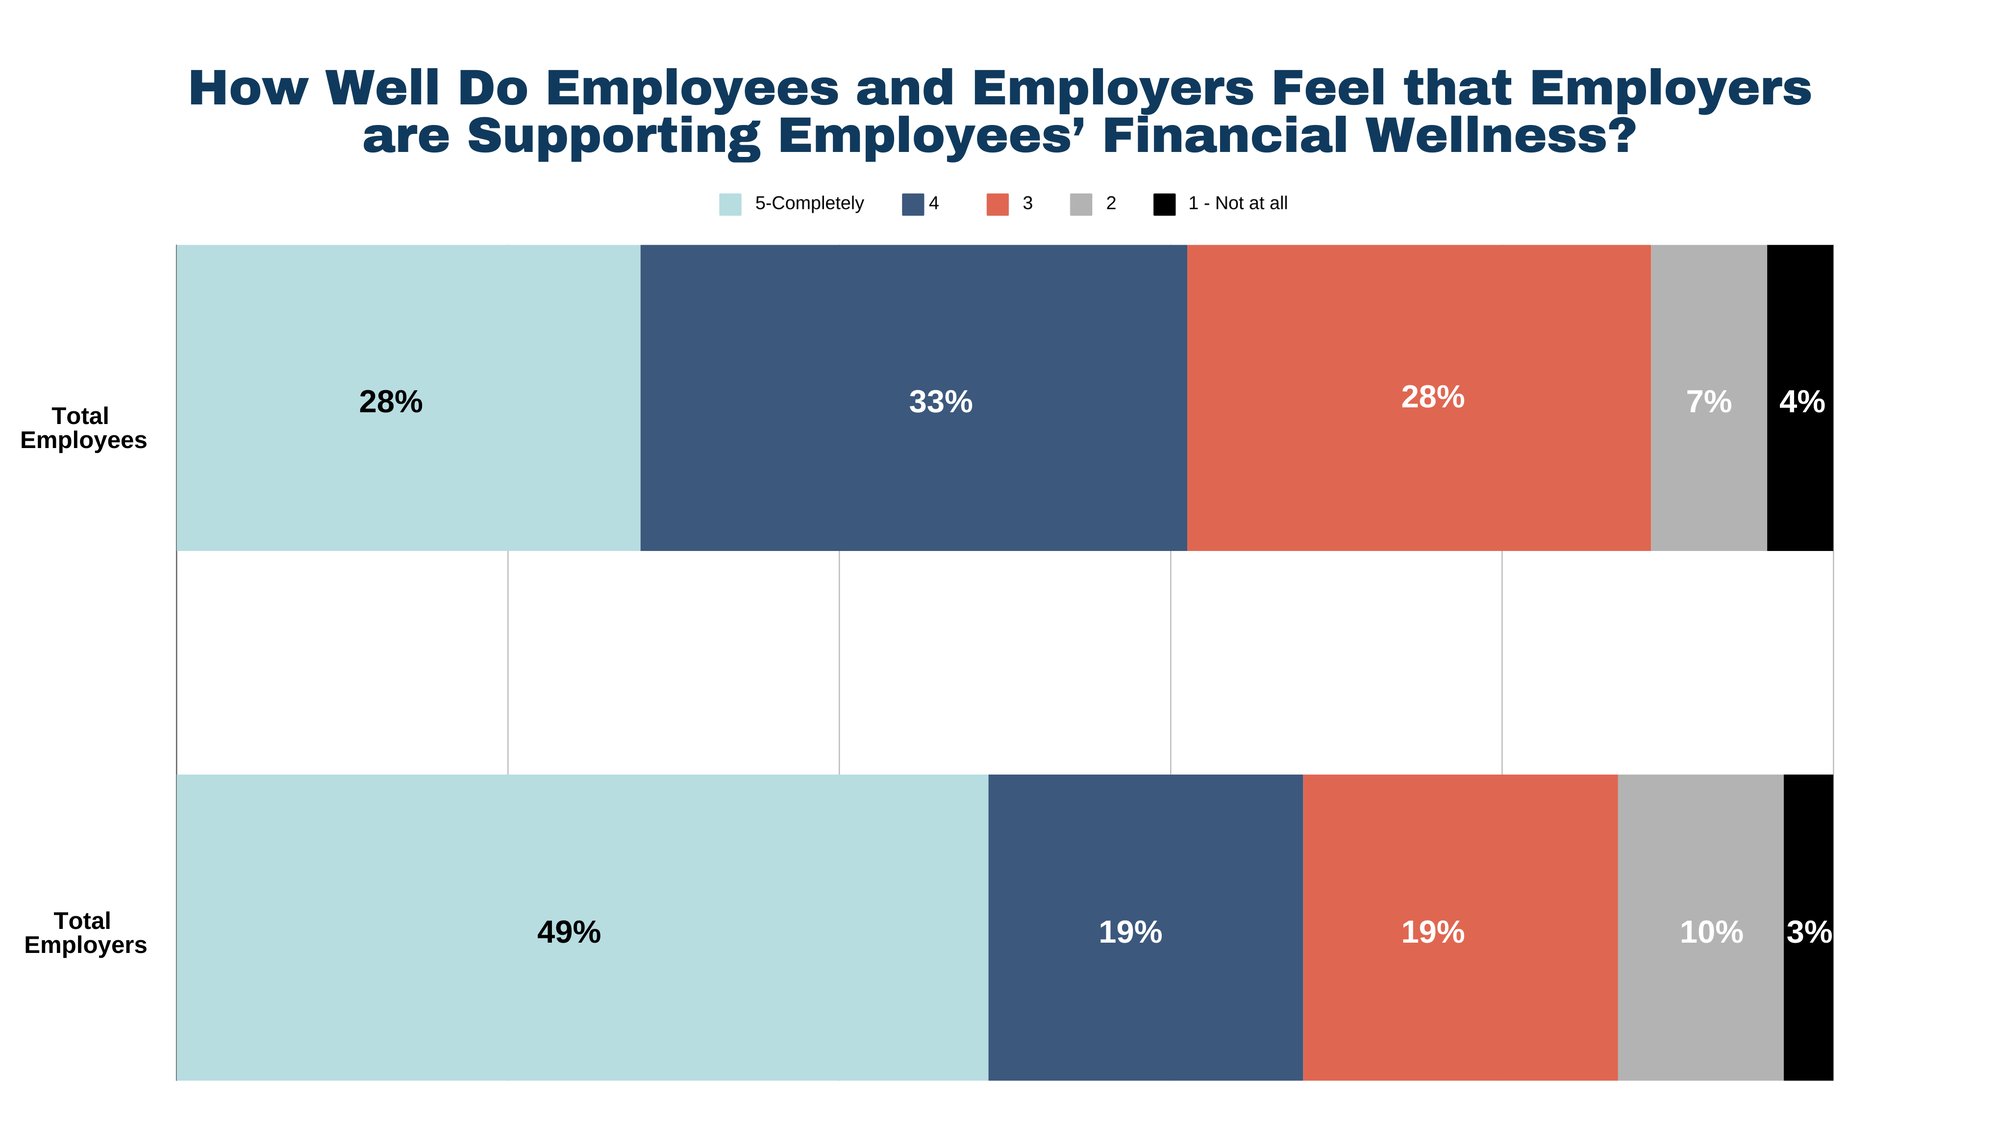 How Well Do Employees and Employers Feel that Employers are Supporting Employees’ Financial Wellness